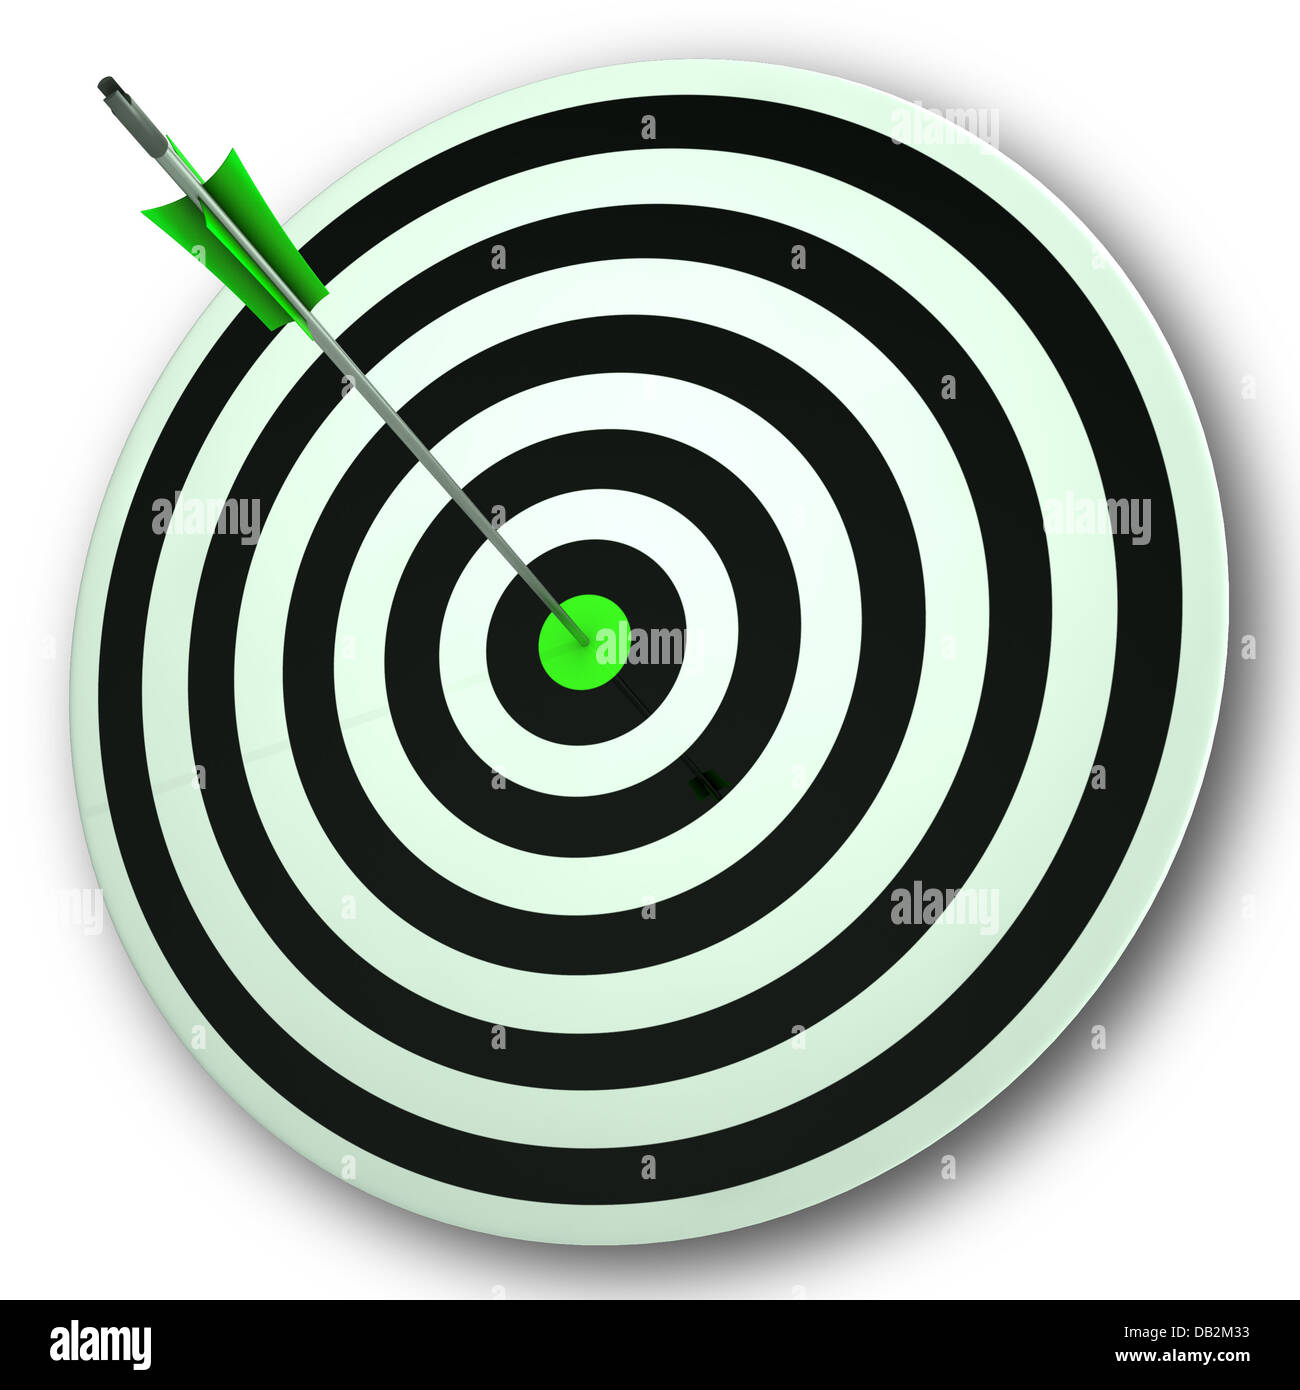 Bulls eye Target Shows Perfect Accuracy And Focus Stock Photo